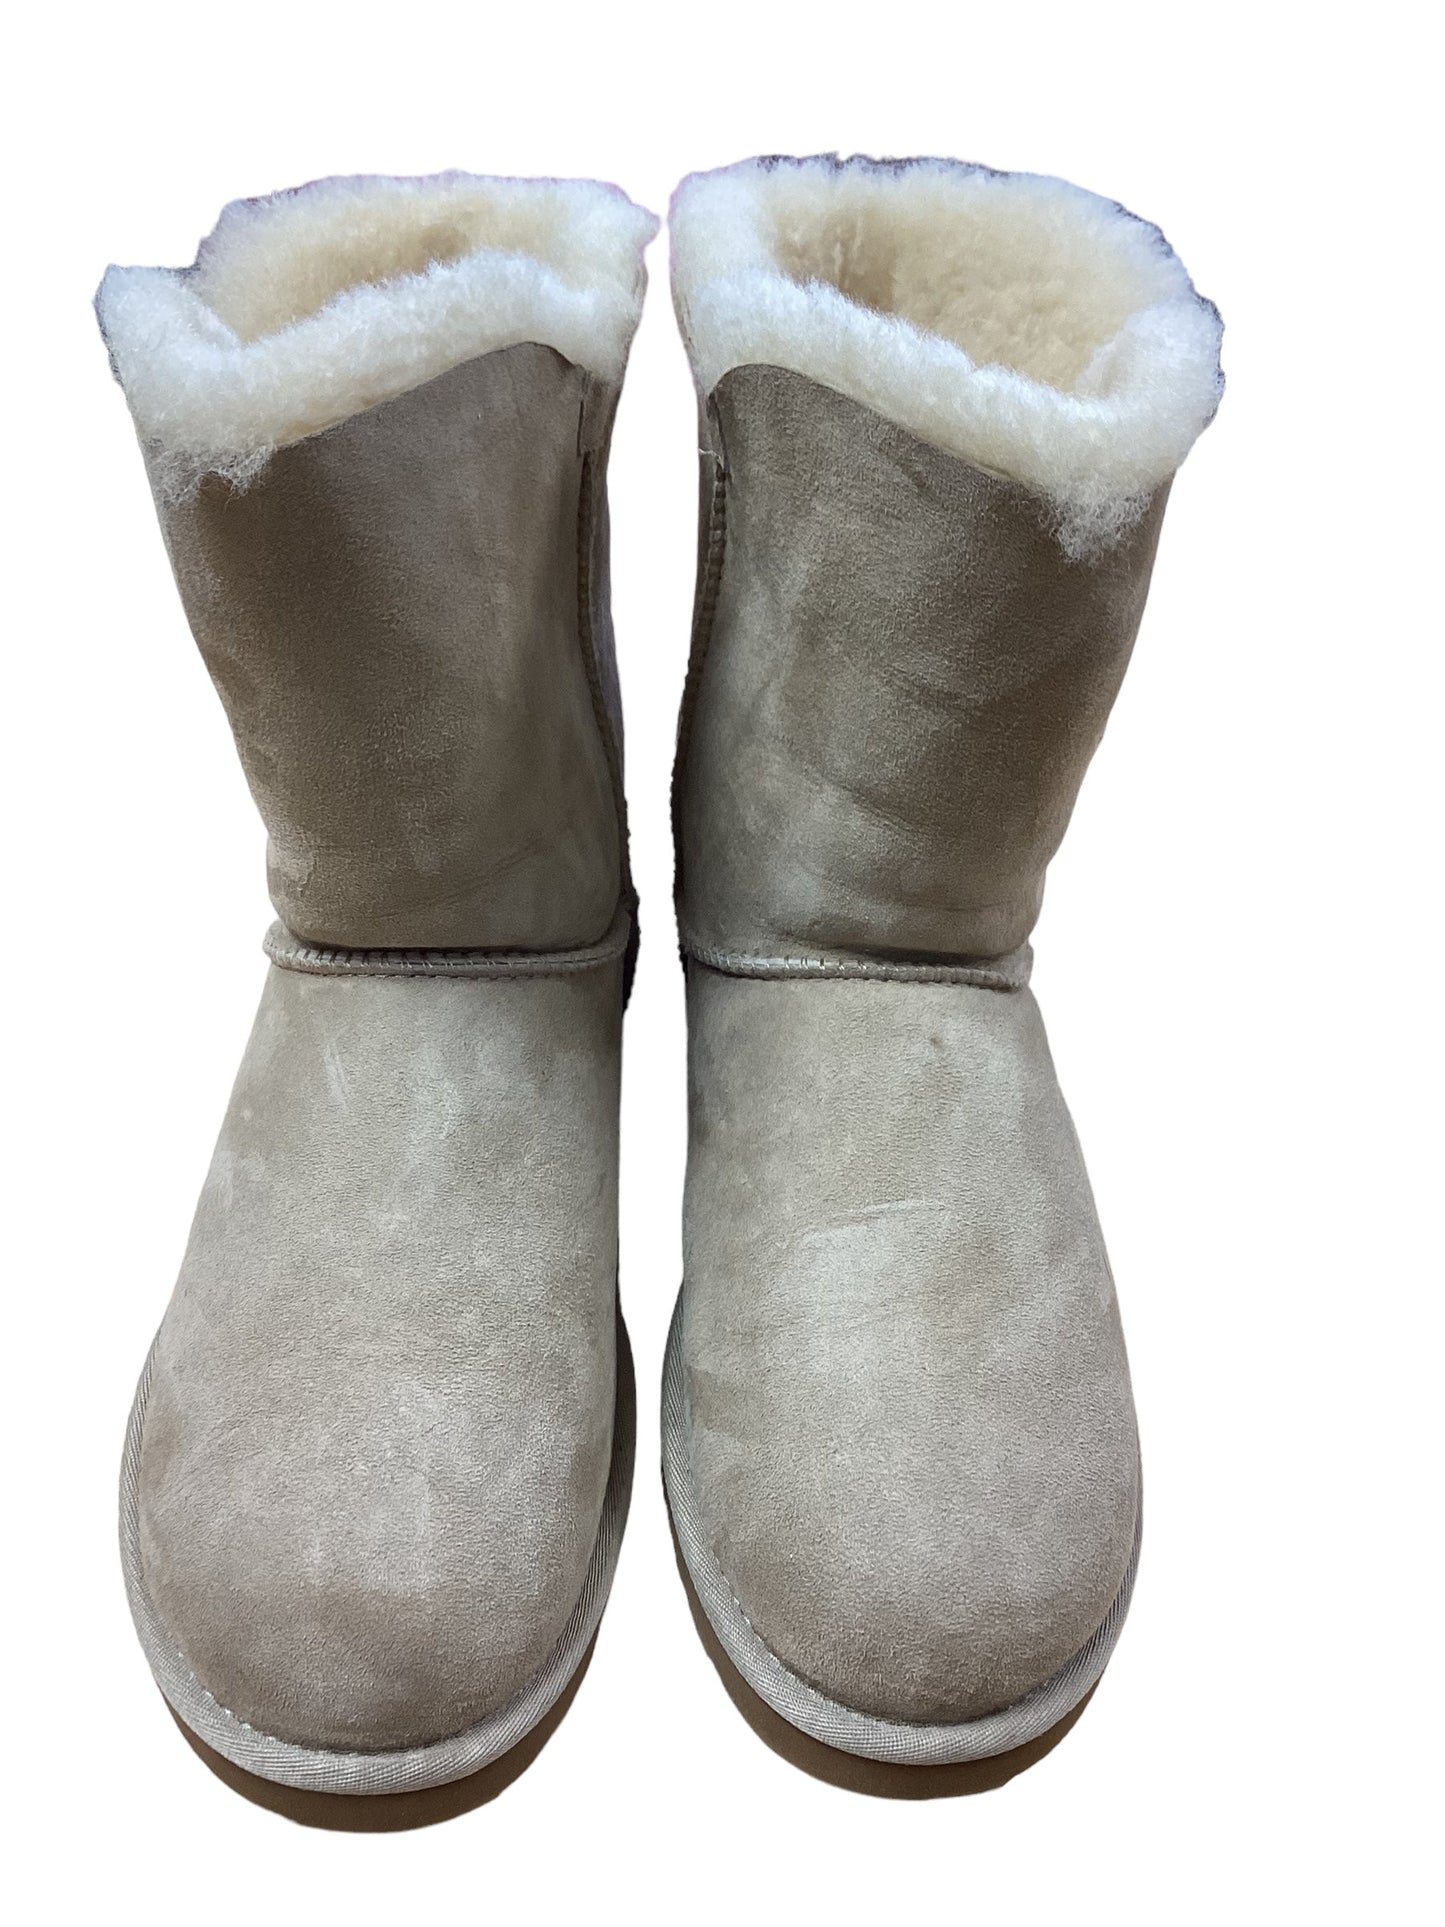 Beige Boots Ankle Flats Ugg, Size 10